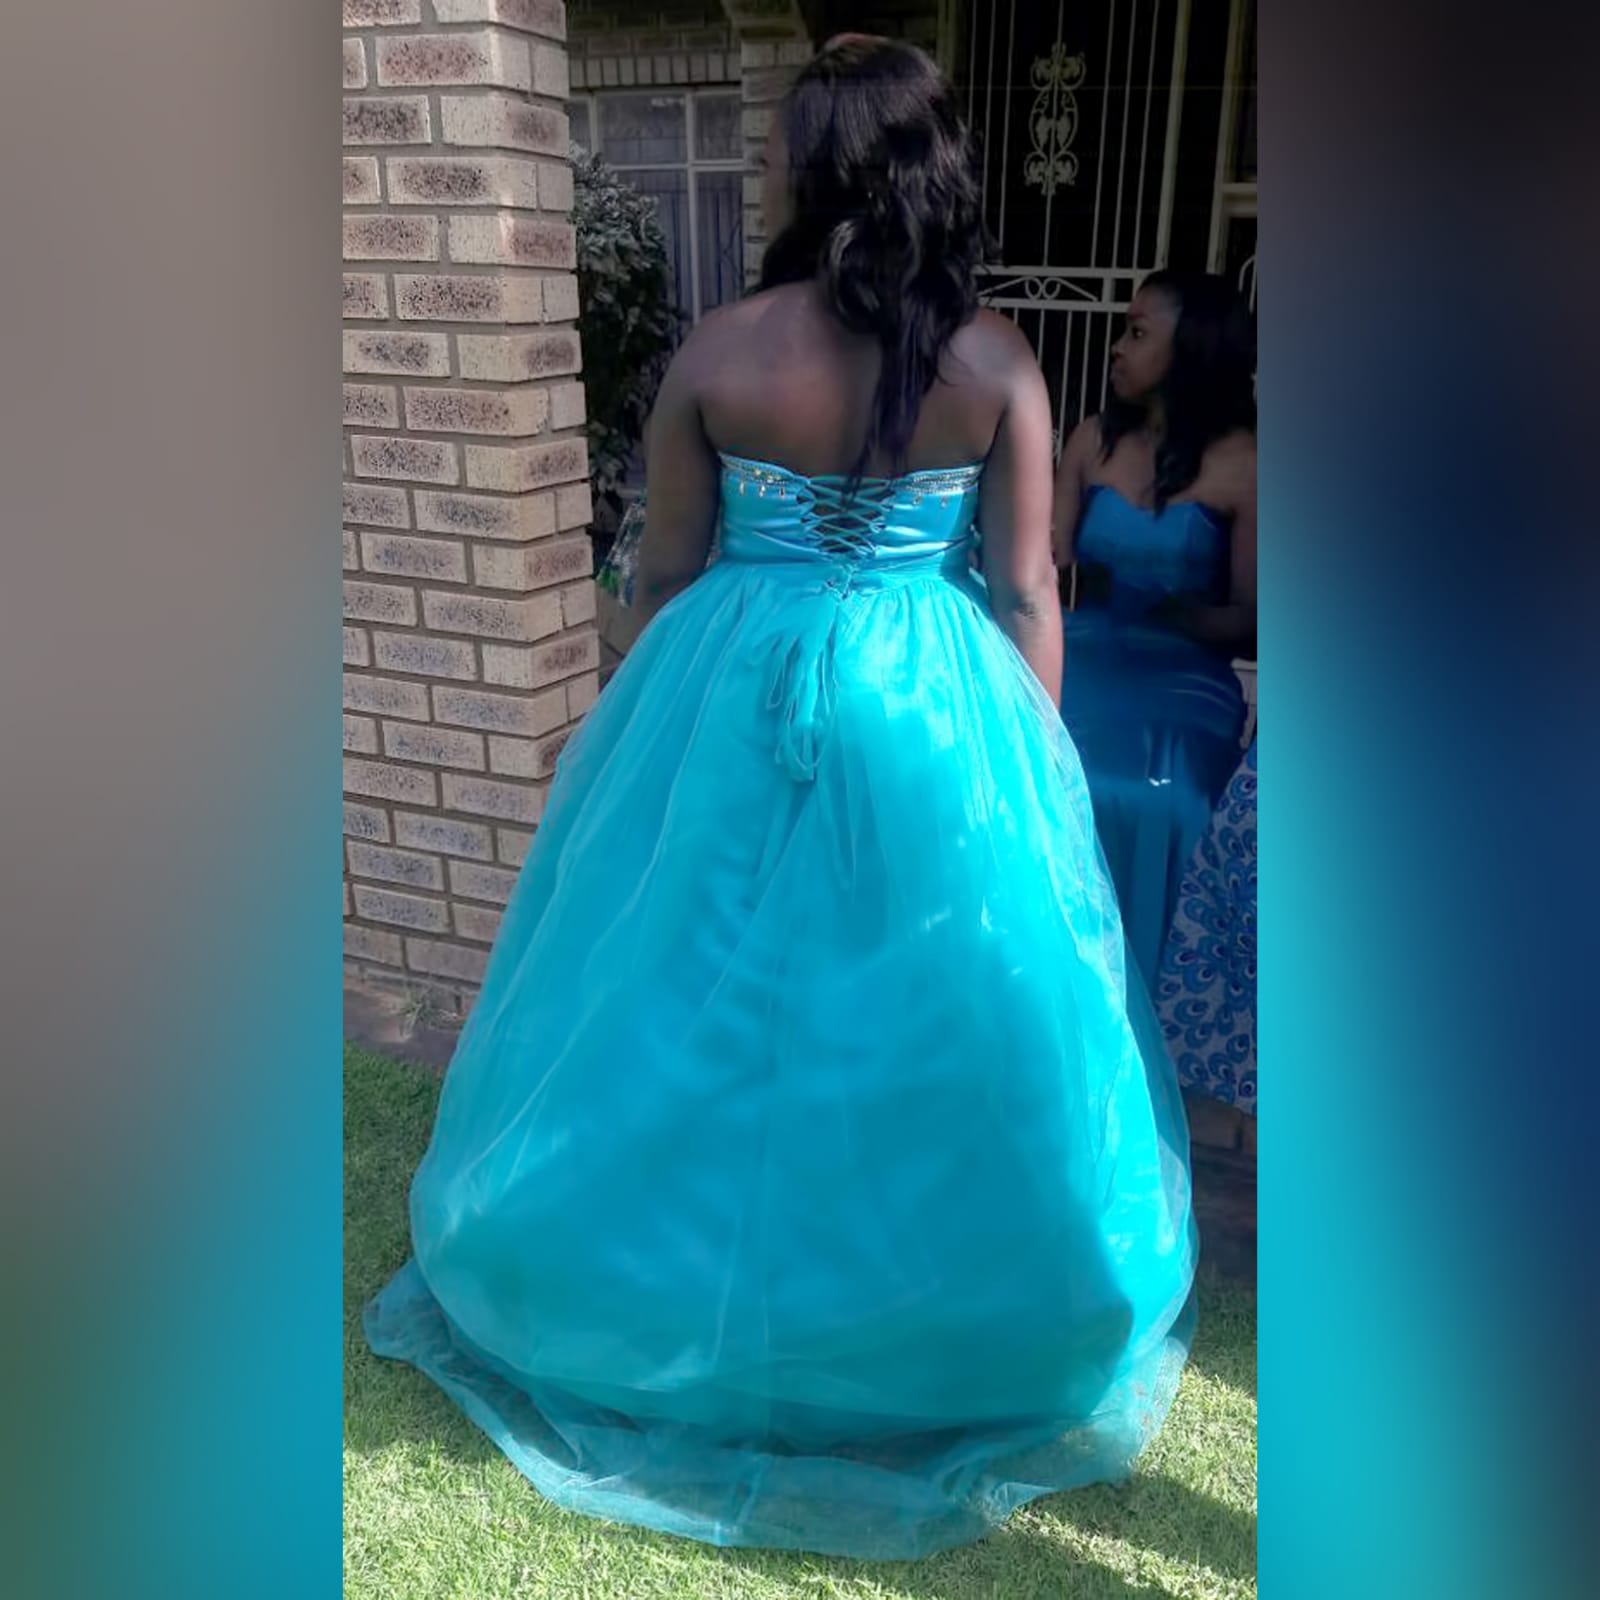 Turquoise and silver ball gown custom made wedding dress 2 turquoise & silver ball gown custom-made wedding dress. With a sweetheart neckline. A lace-up back with an optional back cover panel. Detailed with silver diamante and beads. Ruched belt effect.